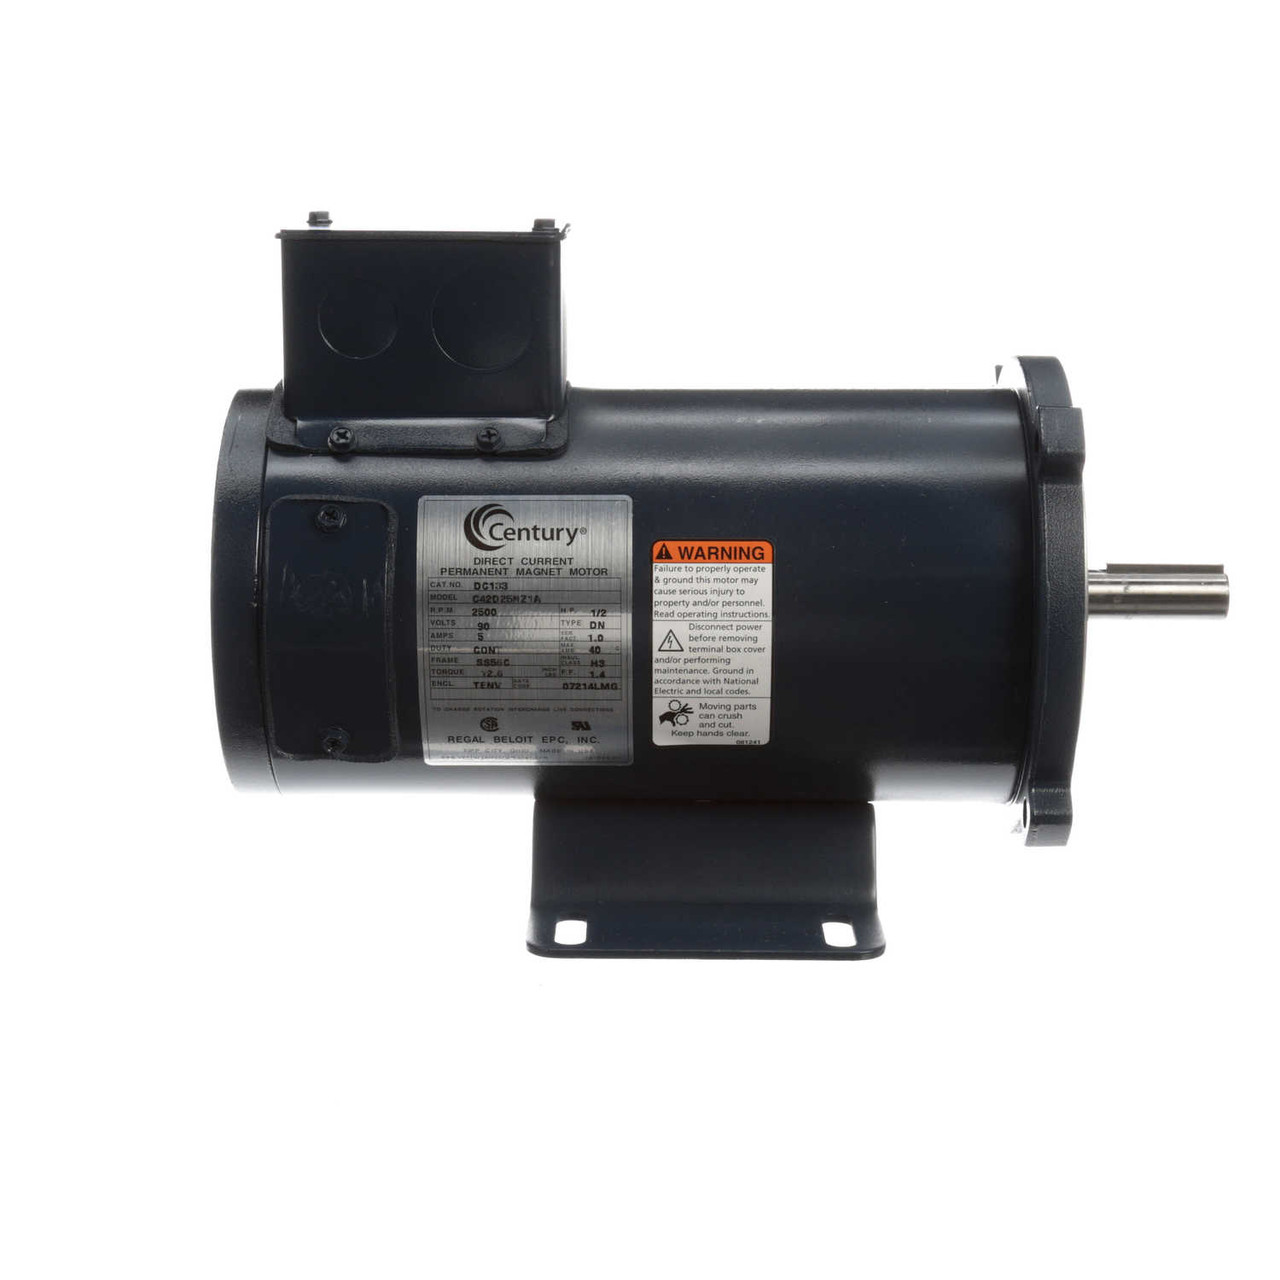 DC133 Permanent Magnet SCR Rated Totally Enclosed C-Face Motor 1/2 HP